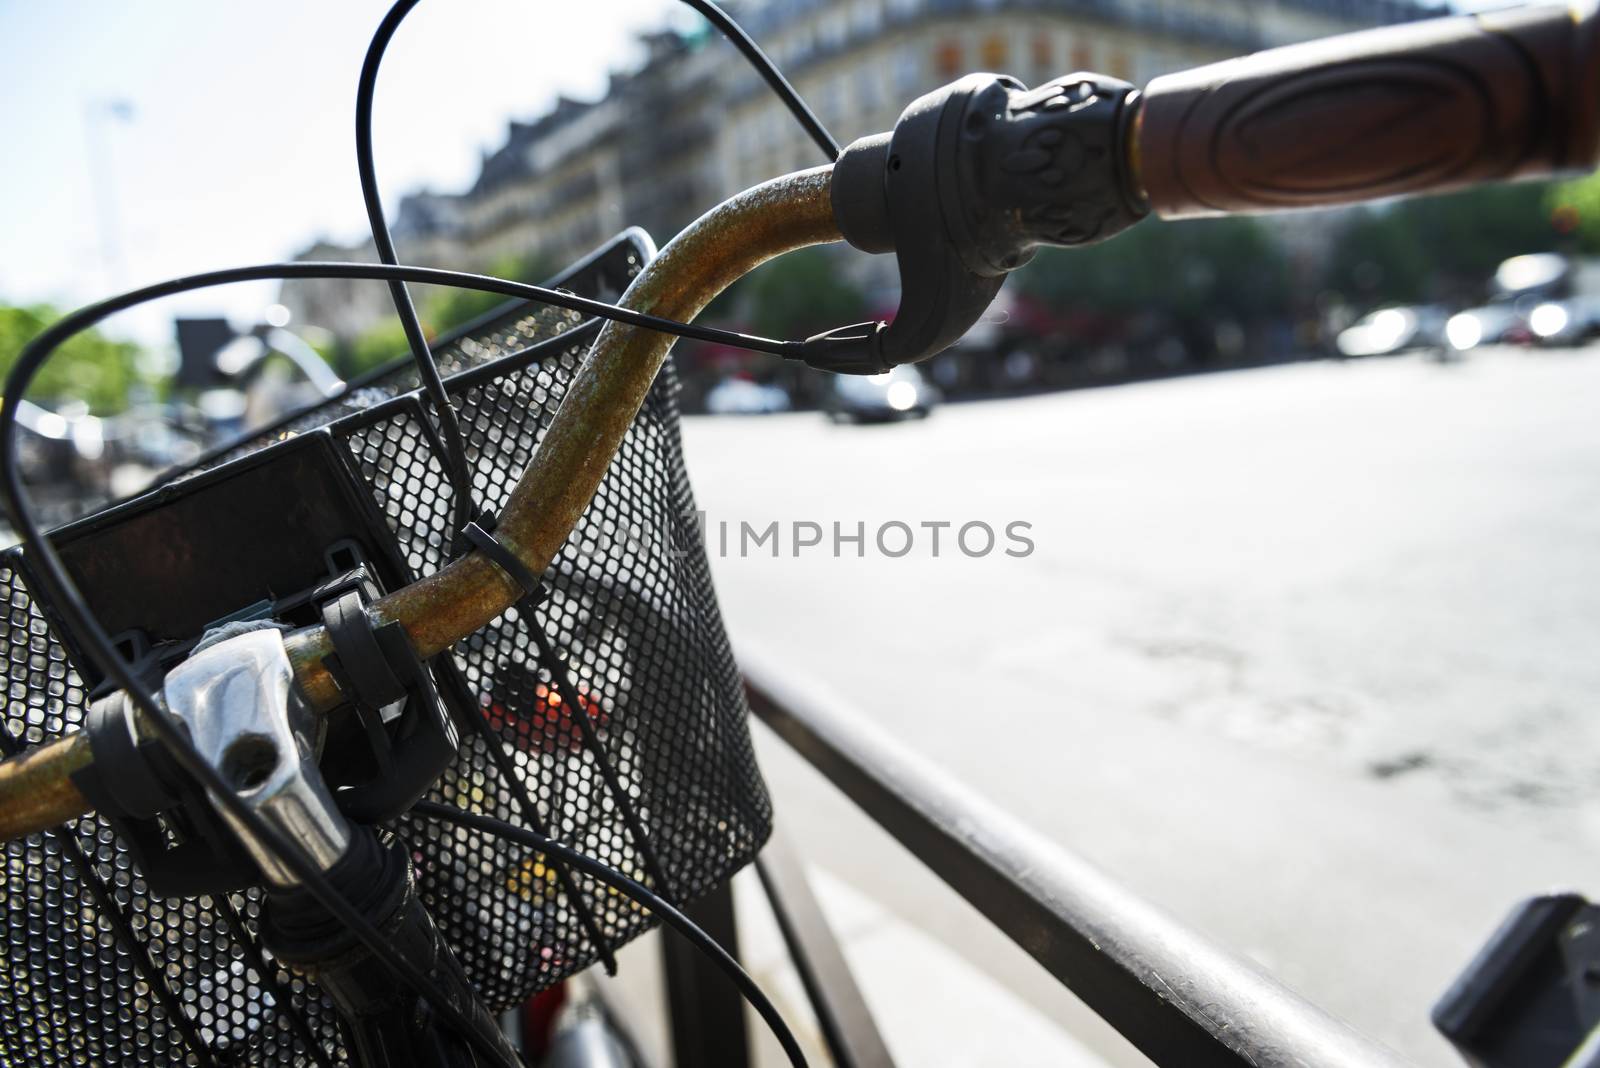 practicing bicycle in urban situation, Paris, France